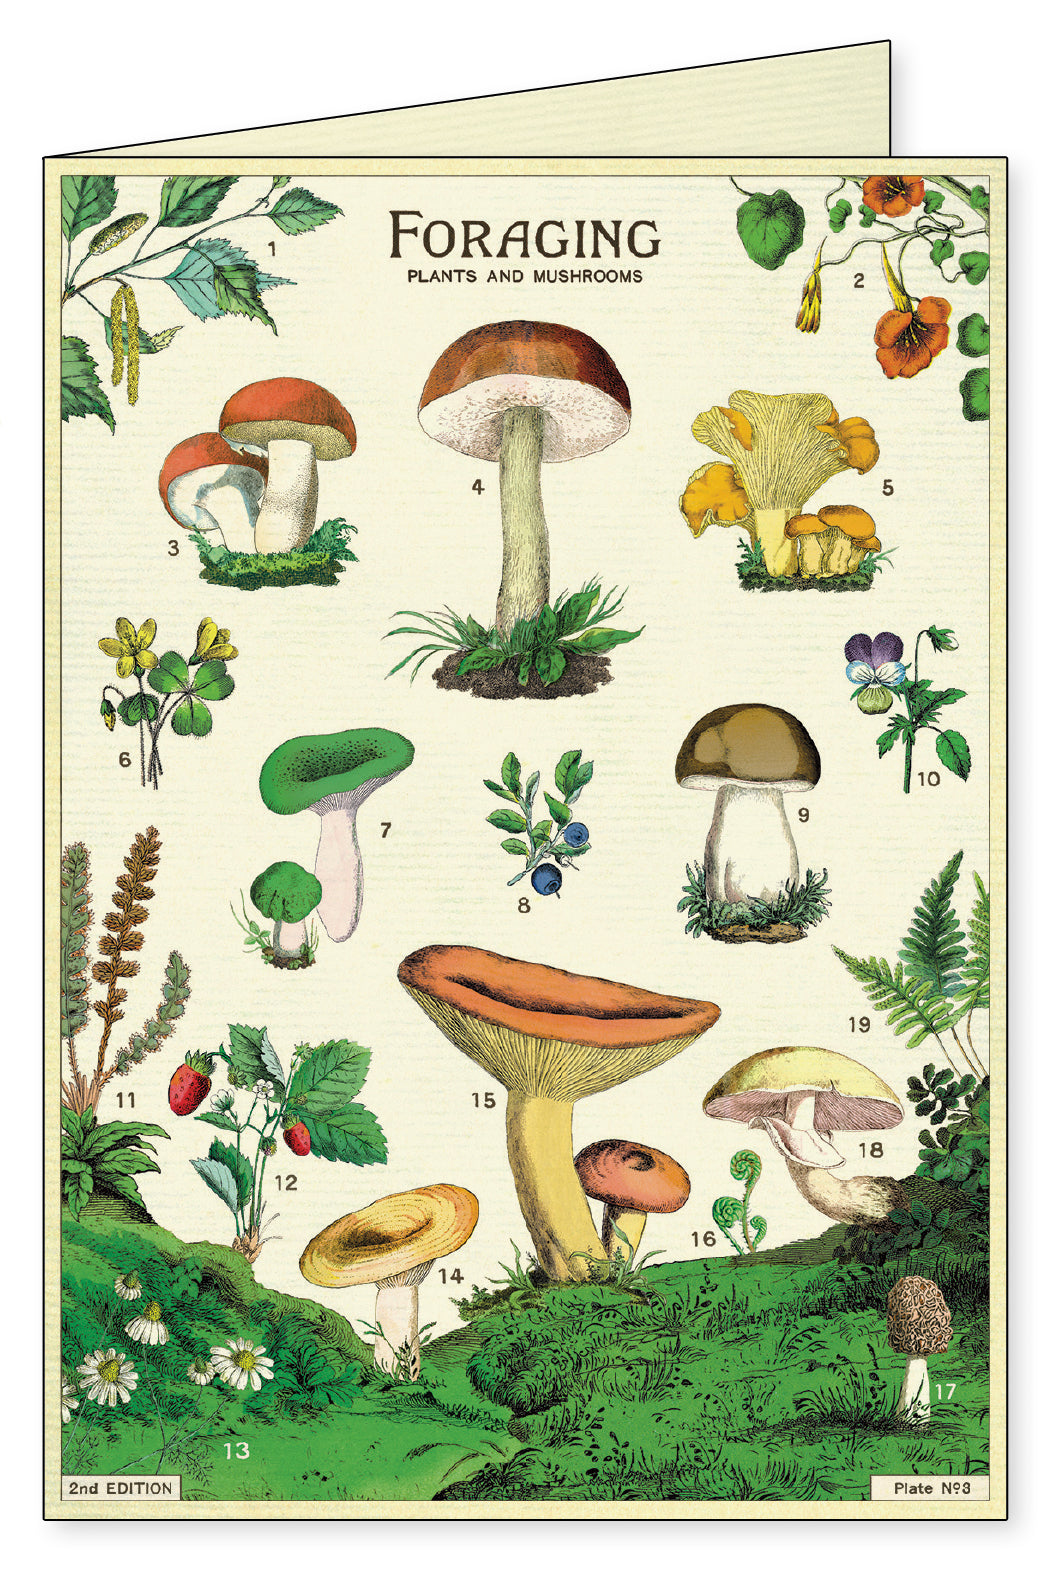 Foraging Notecards Set of 8